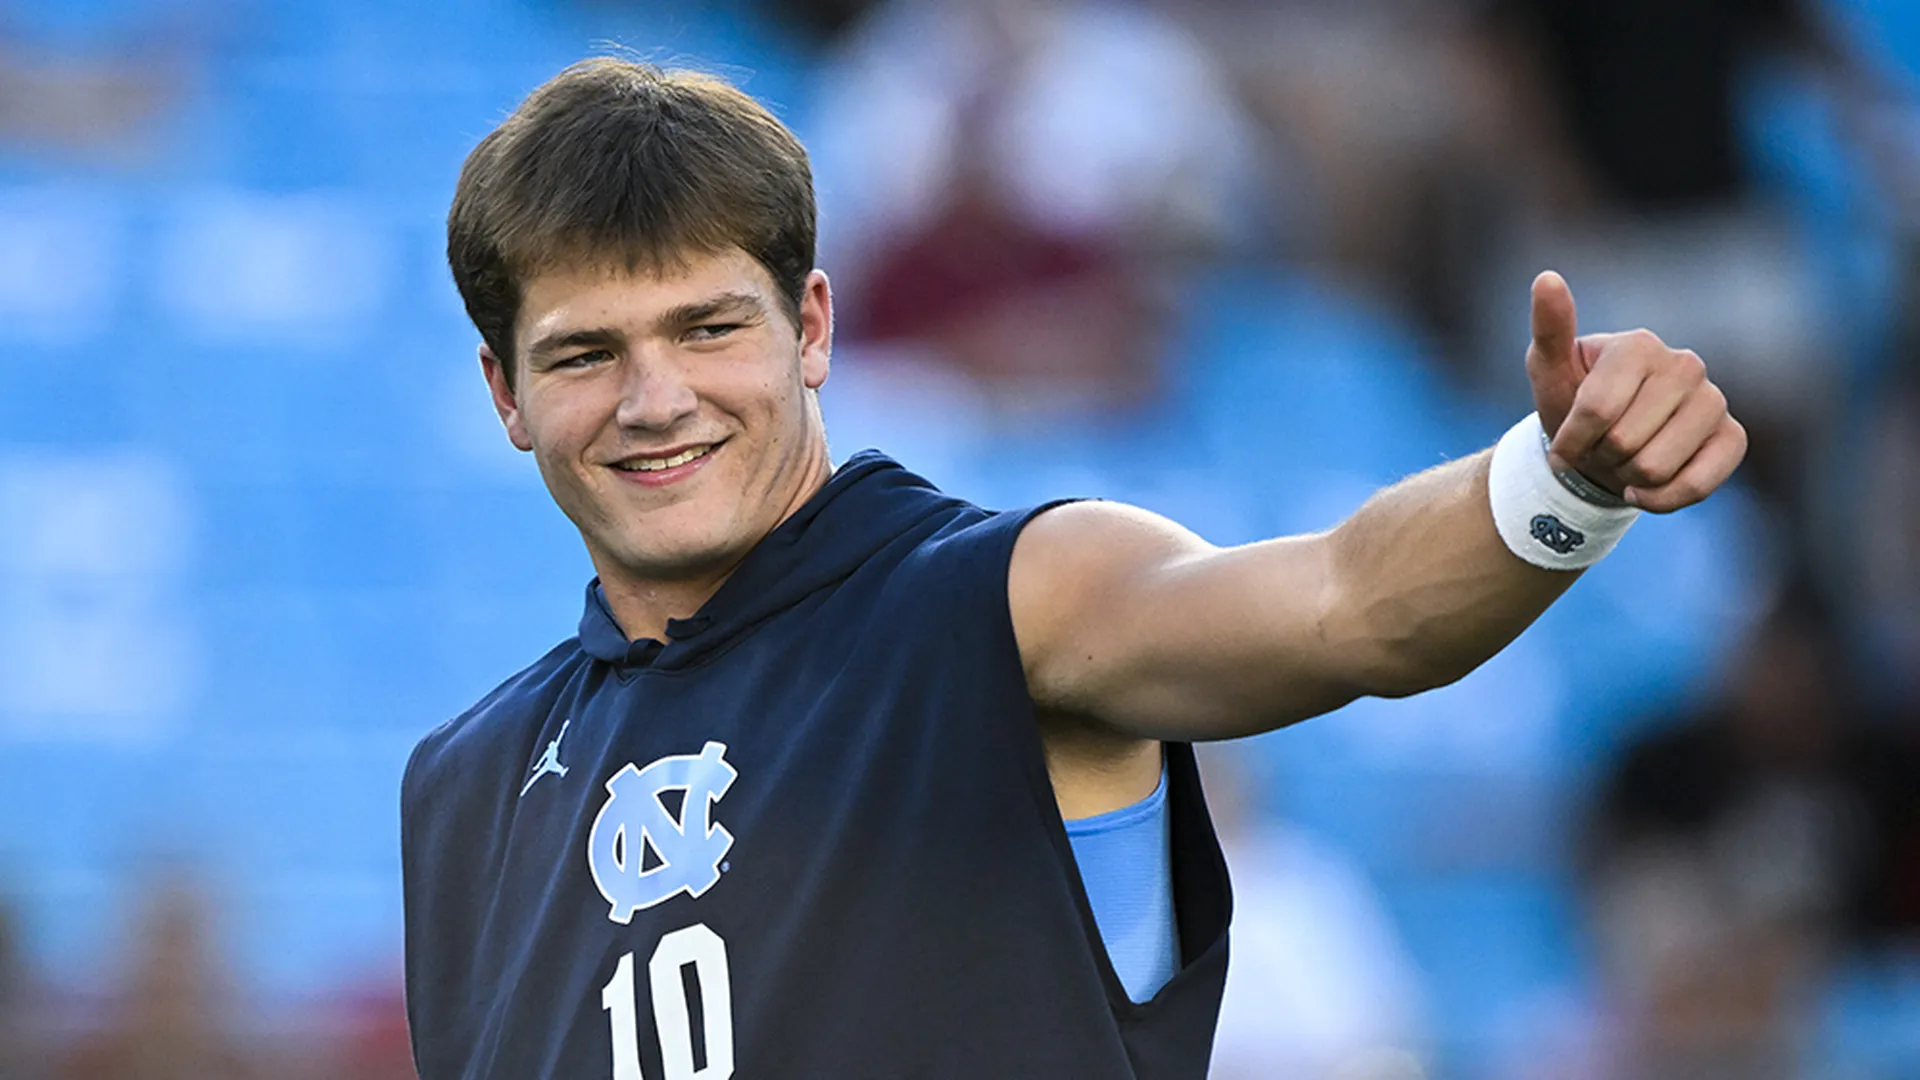 NFL News Drake Maye's Rocky Road Ahead with New England Patriots, An InDepth Look at His